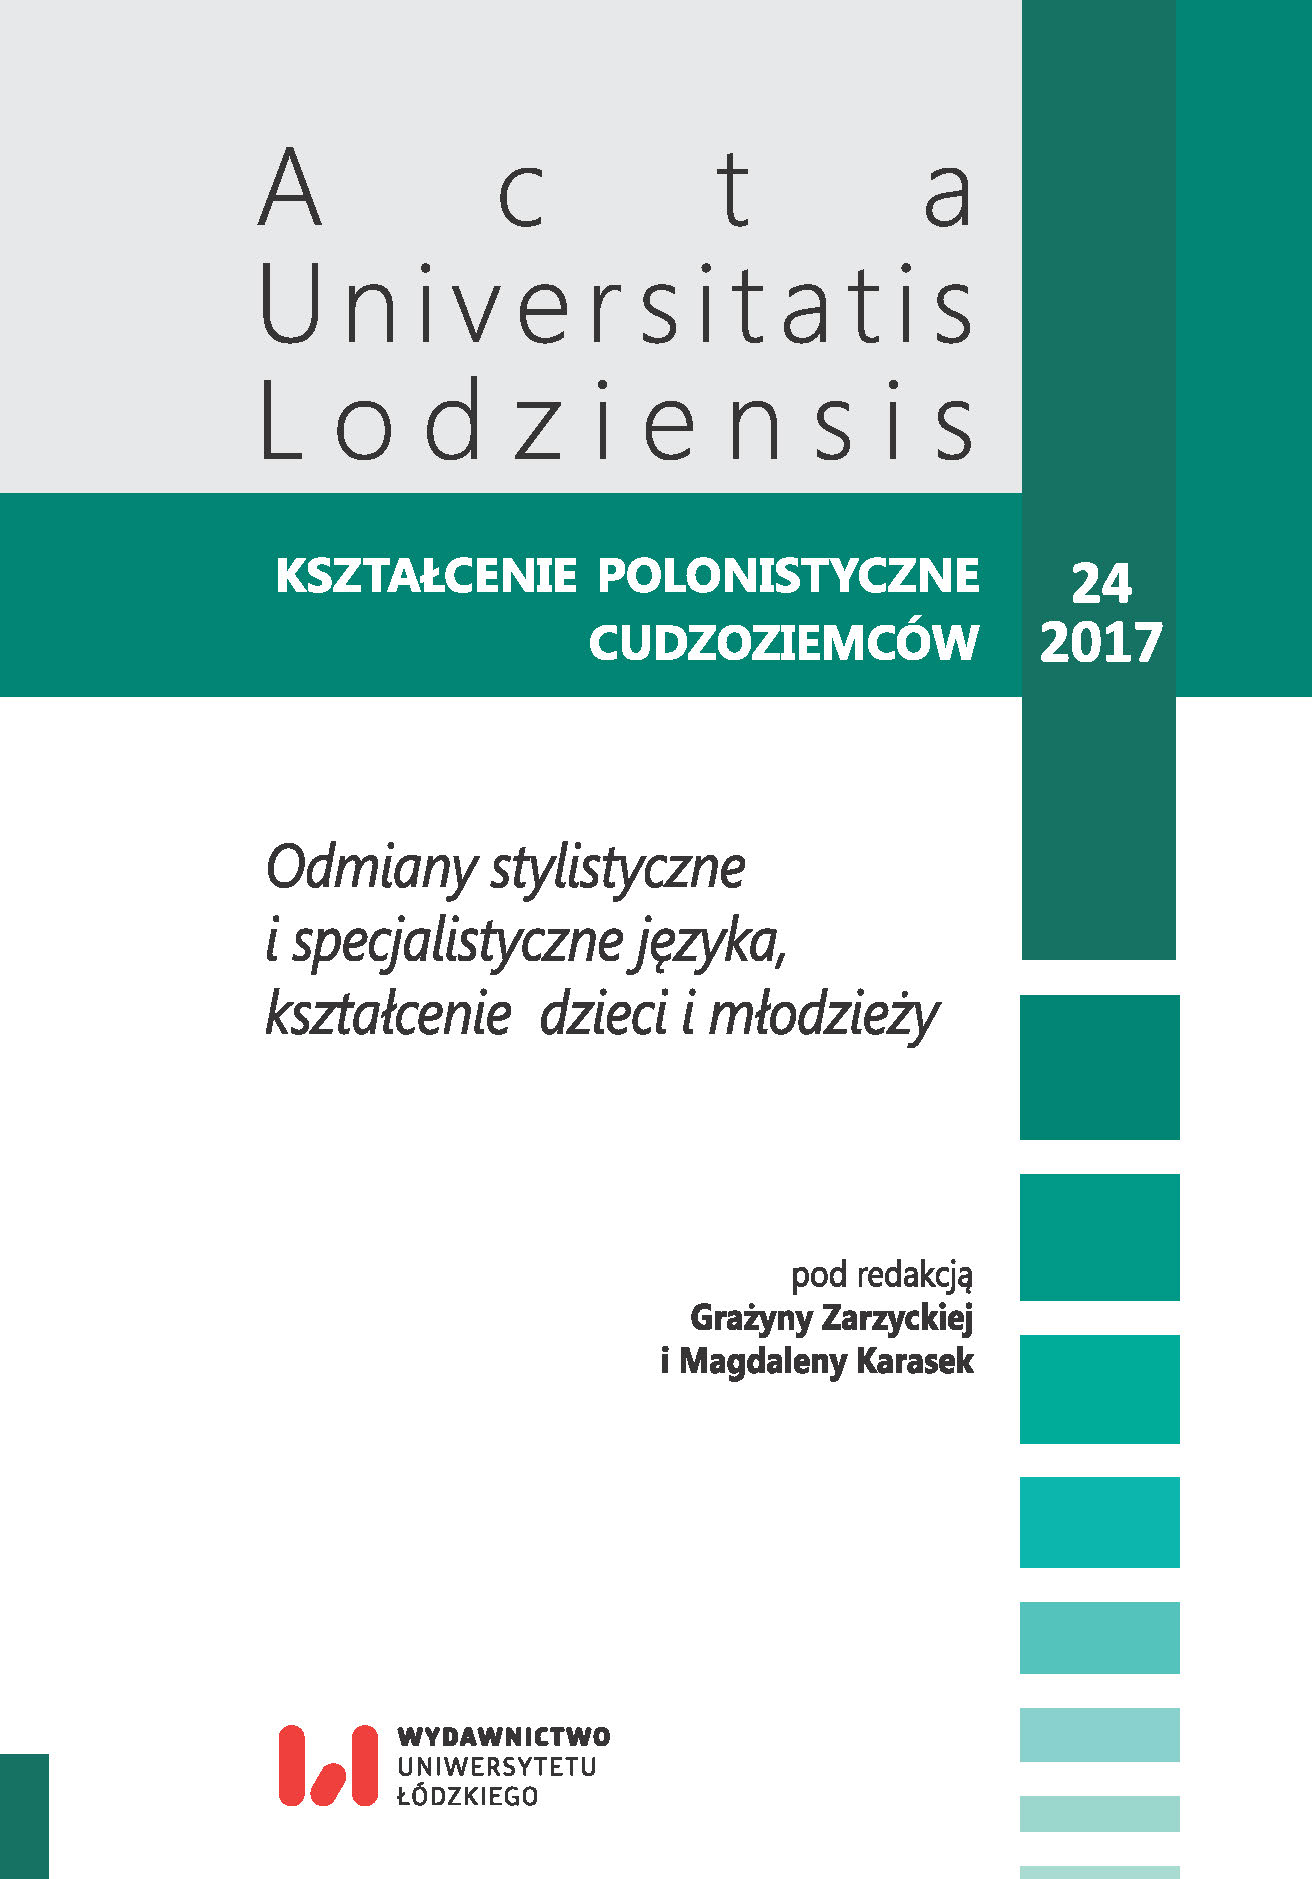 New dimensions of glottodidactics: the problems of teaching stylistic and specialized variants of polish and other languages and education of children and adoloscents Cover Image